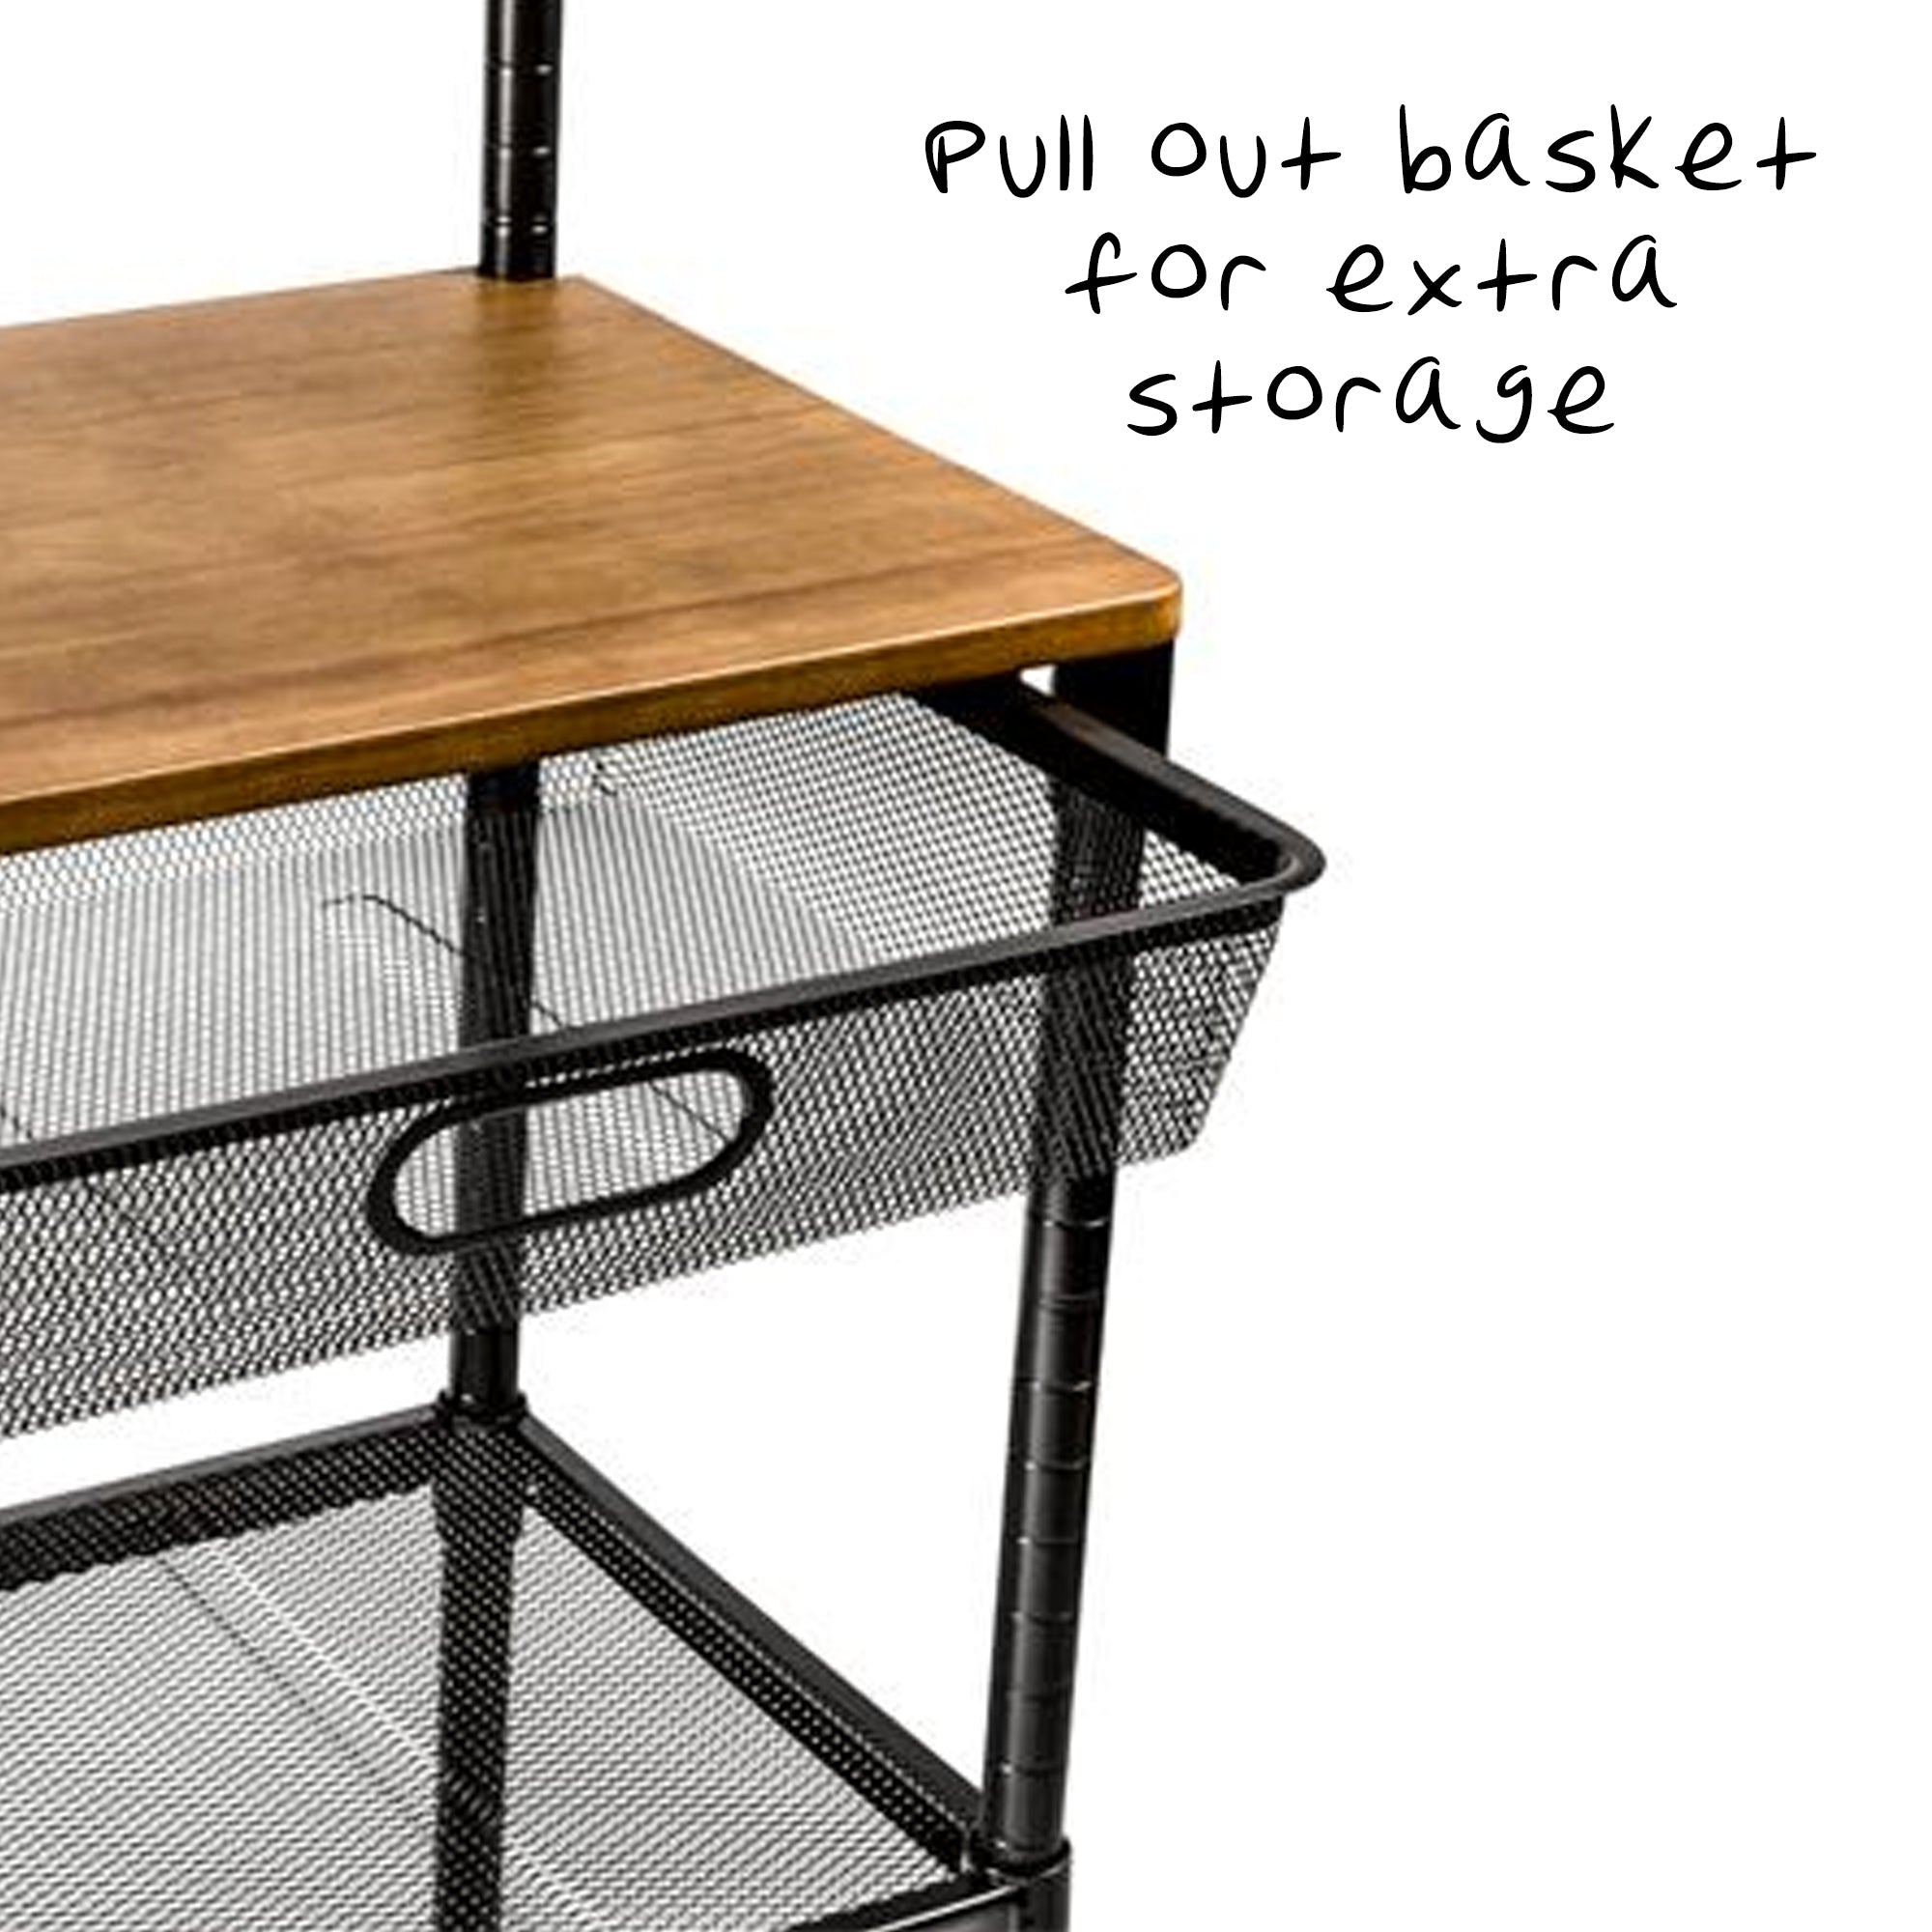 Honey-Can-Do Bakers Rack With Shelves And Hanging Storage